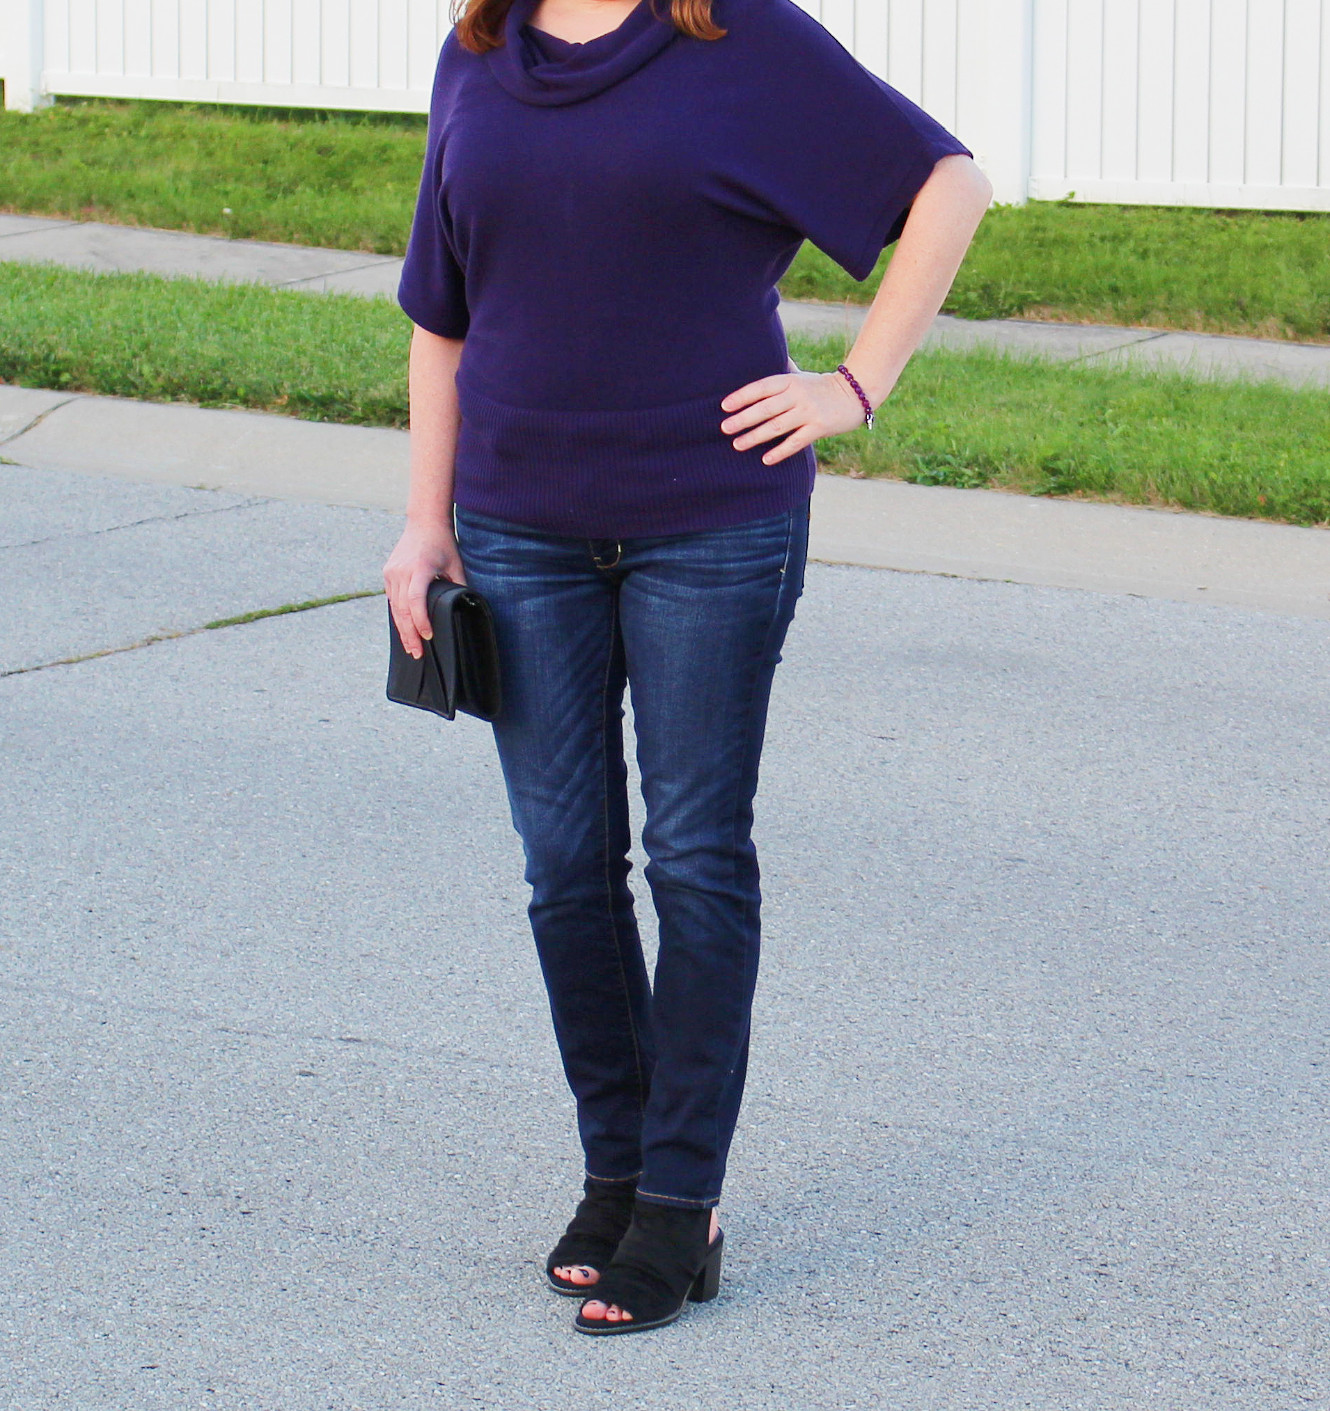 Cowl Neck Sweater And Jeans